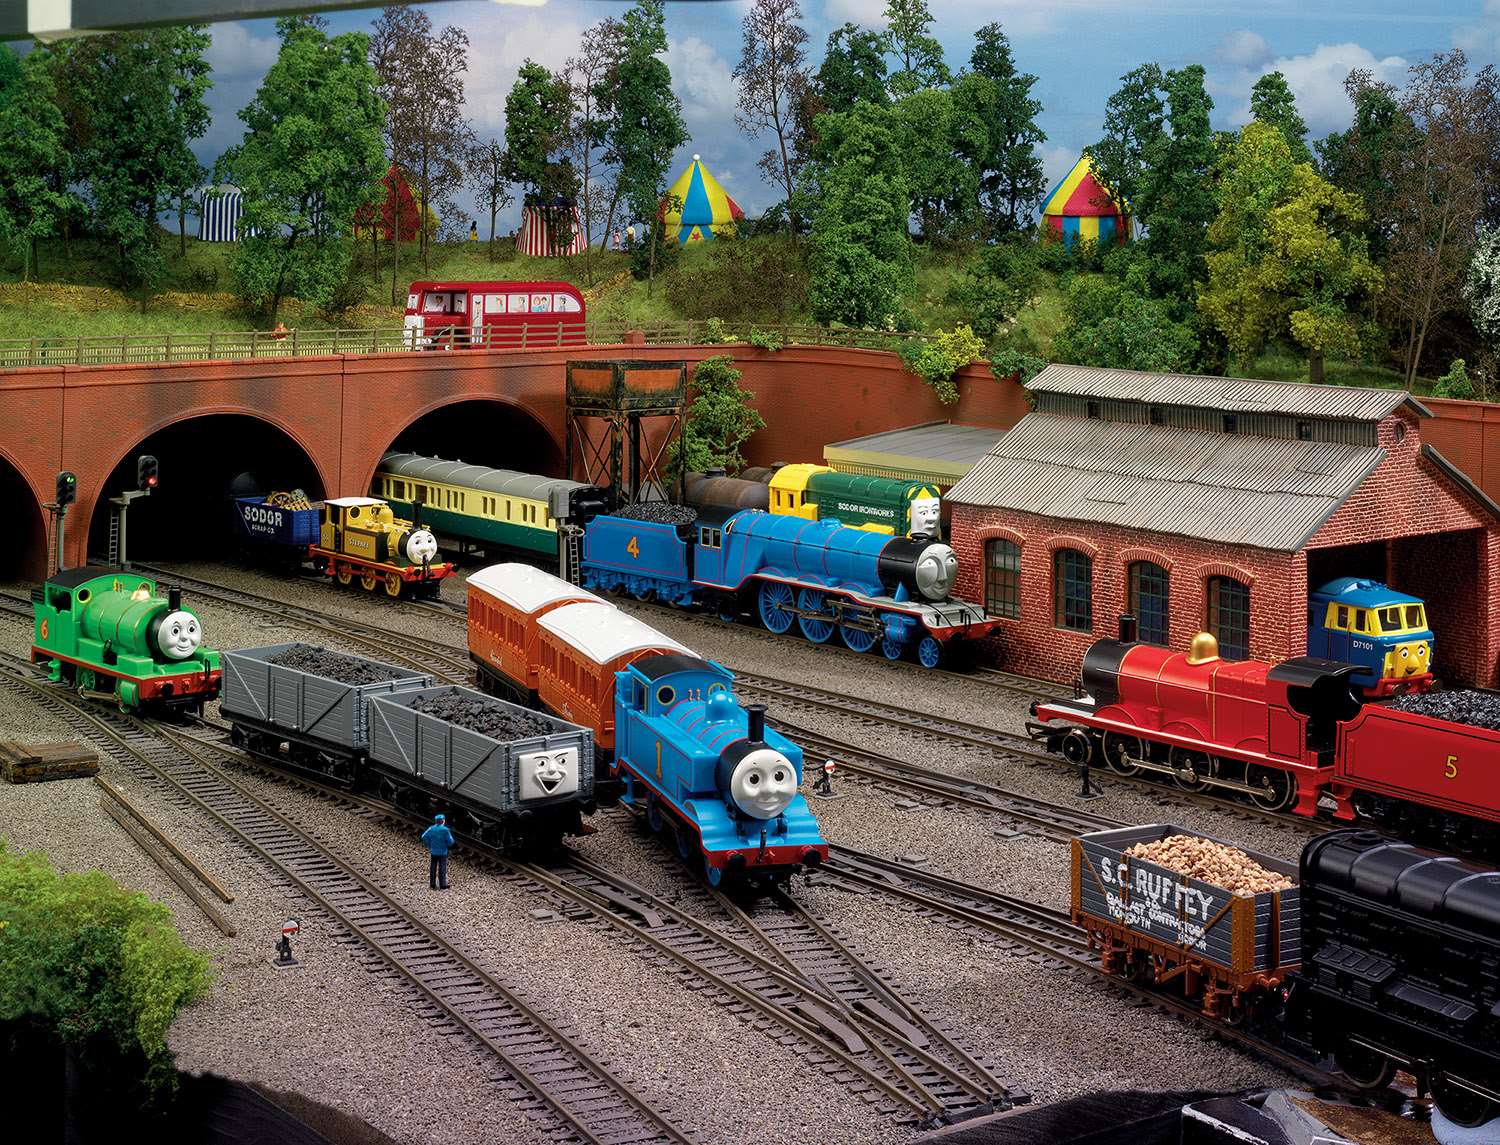 The Thomas and Friends model trains will be made by Hornby to celebrate the character's 70th anniversary.